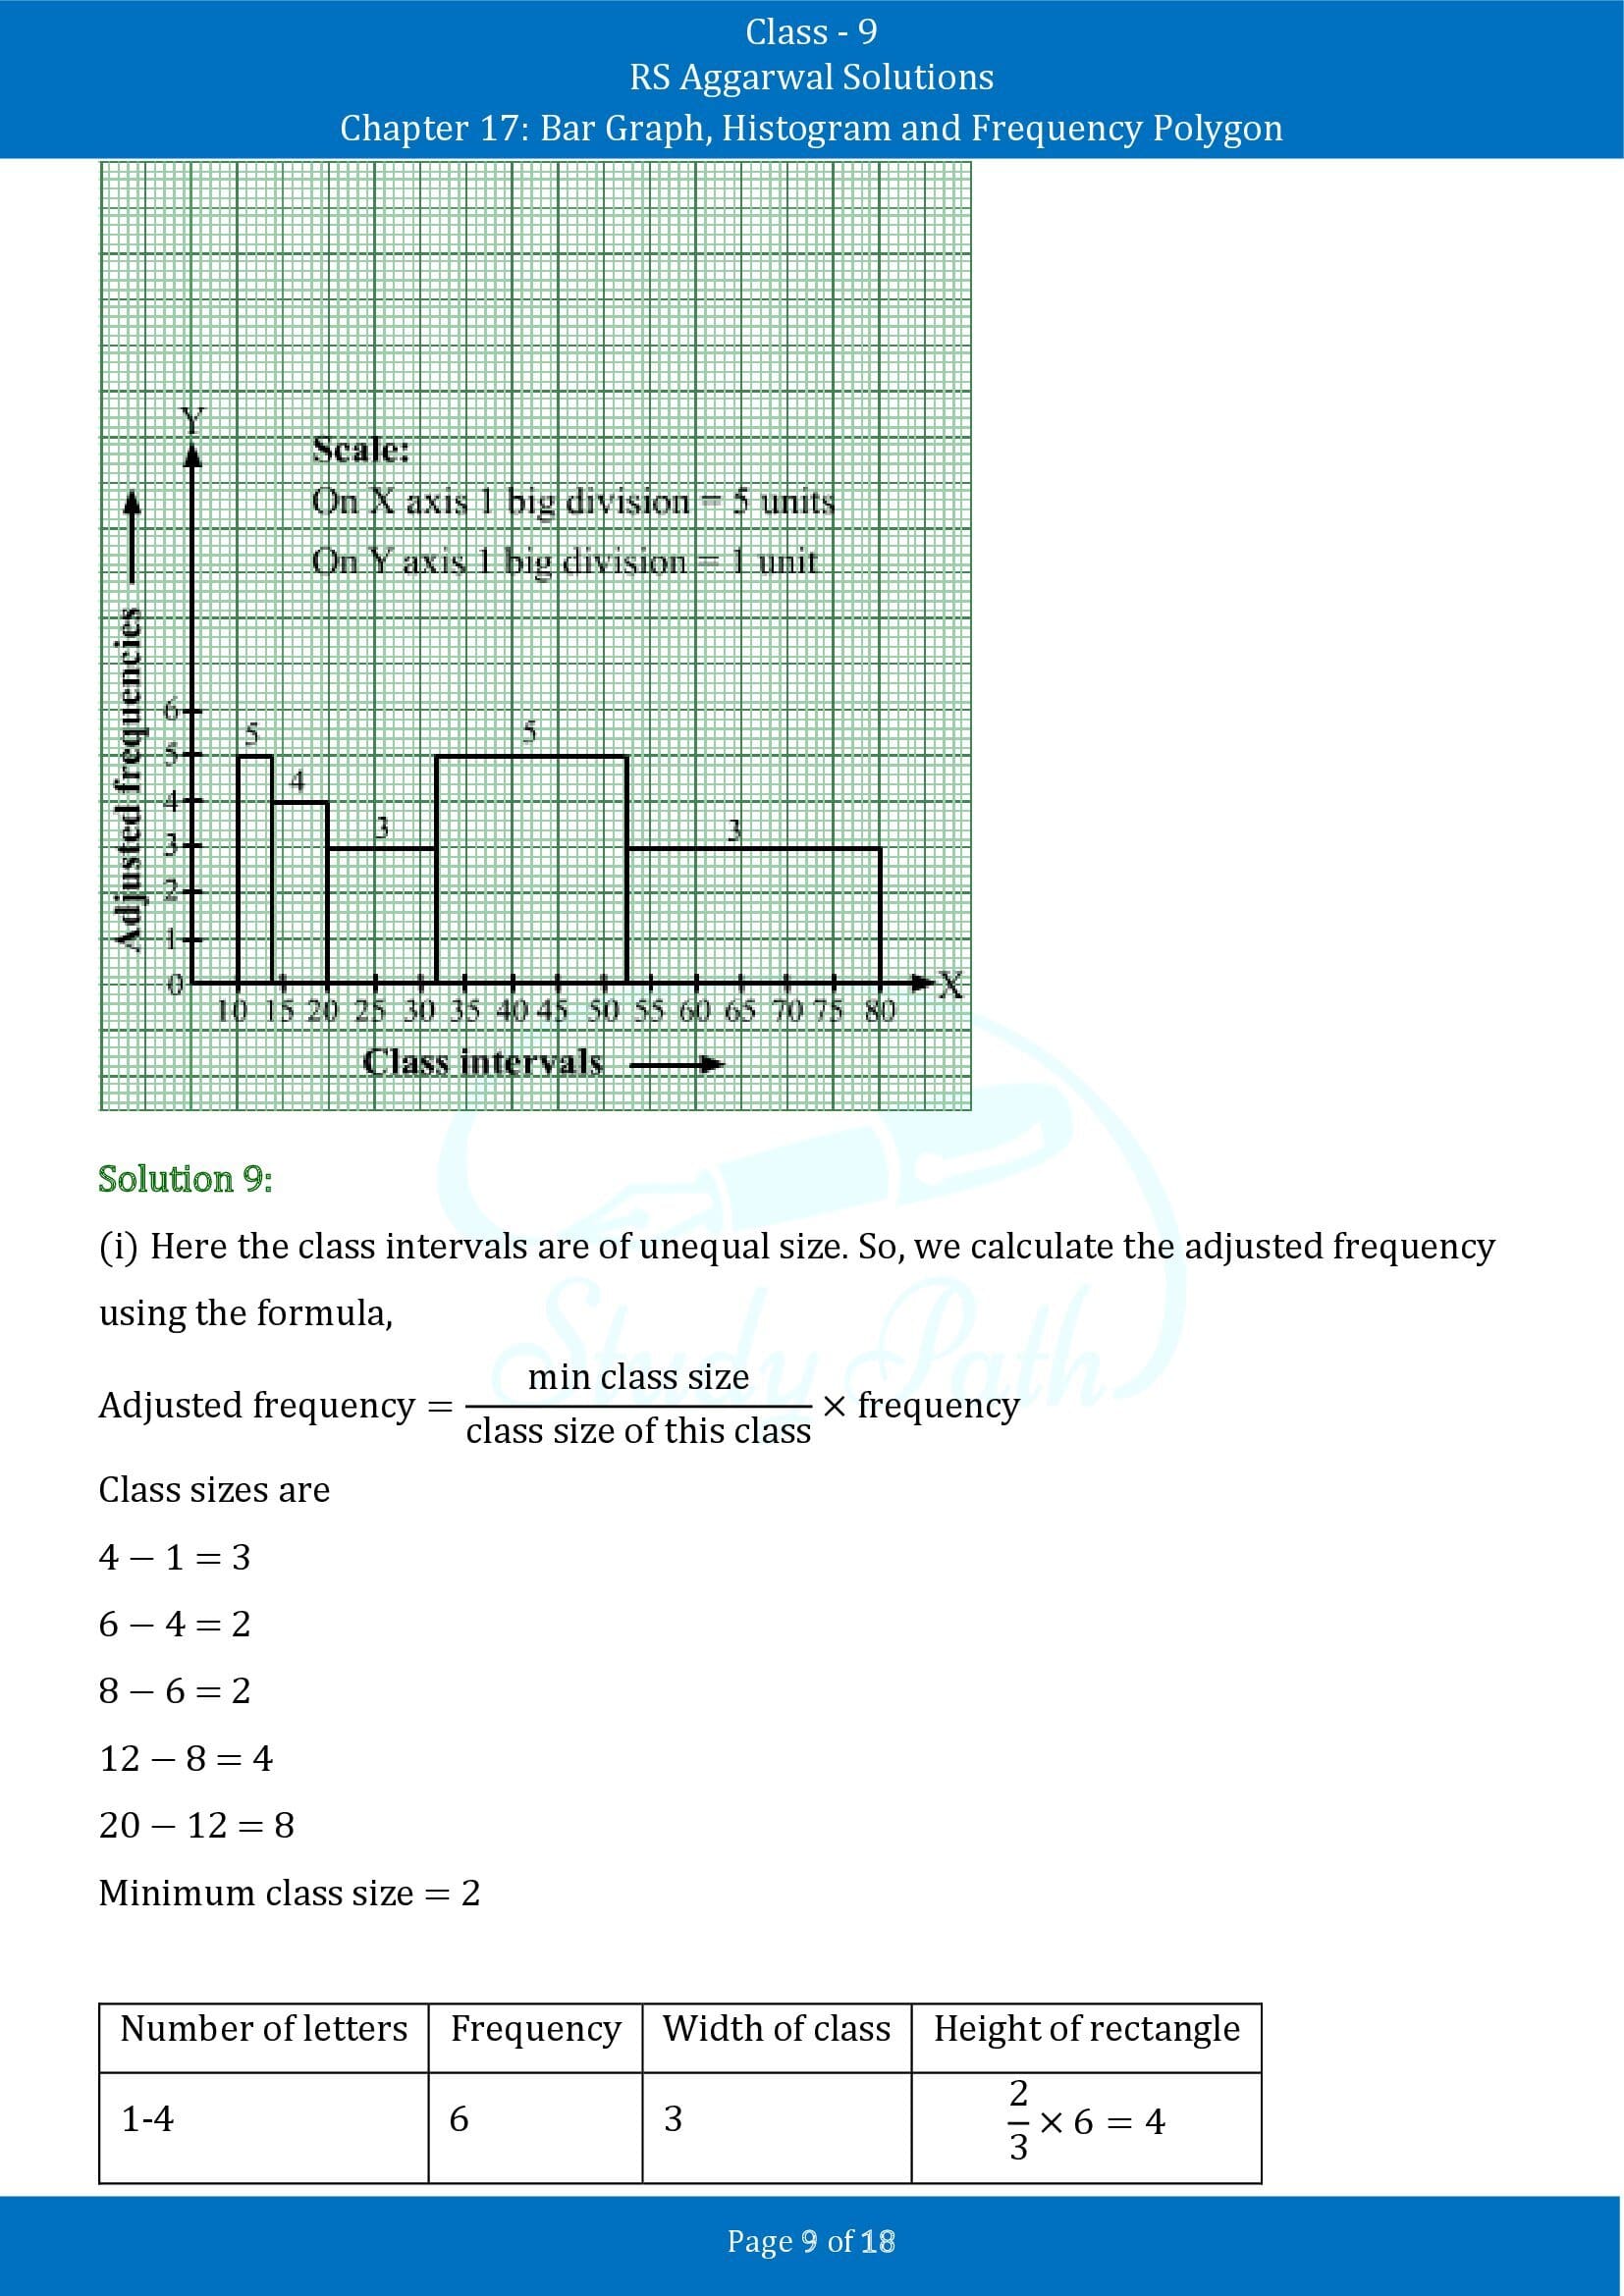 RS Aggarwal Solutions Class 9 Chapter 17 Bar Graph Histogram and Frequency Polygon Exercise 17B 00009